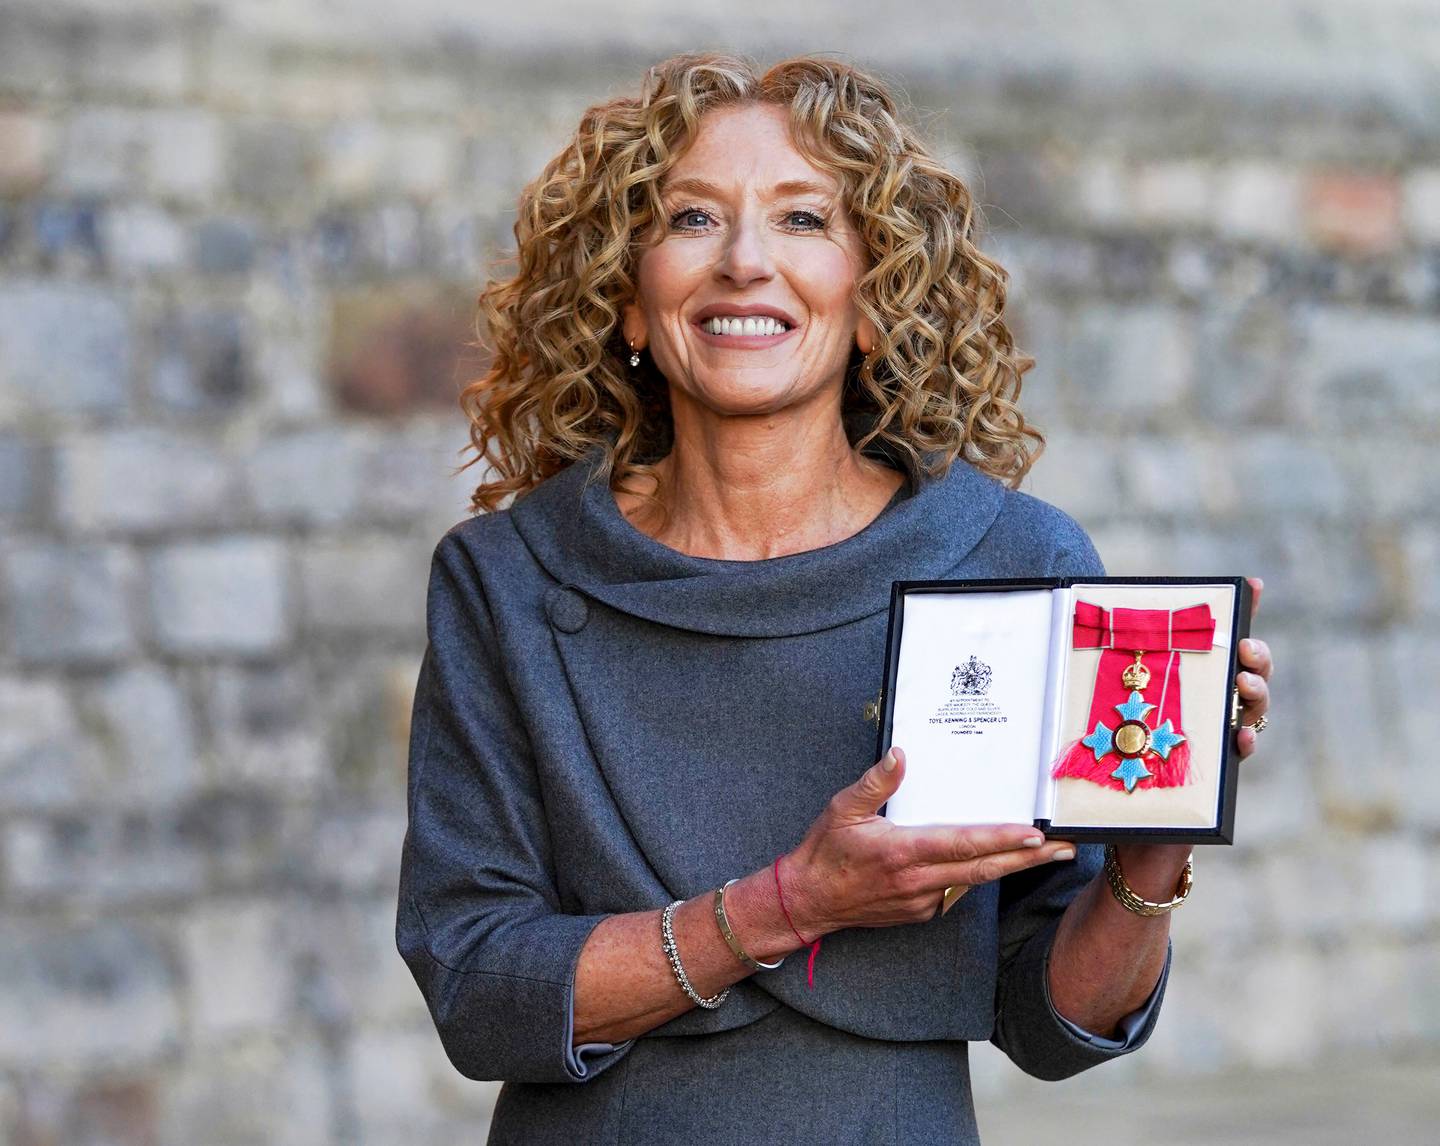 Kelly Hoppen poses after the ceremony at Windsor Castle in London, where she was awarded Commander of the Order of the British Empire (CBE) in November 2021.AFP